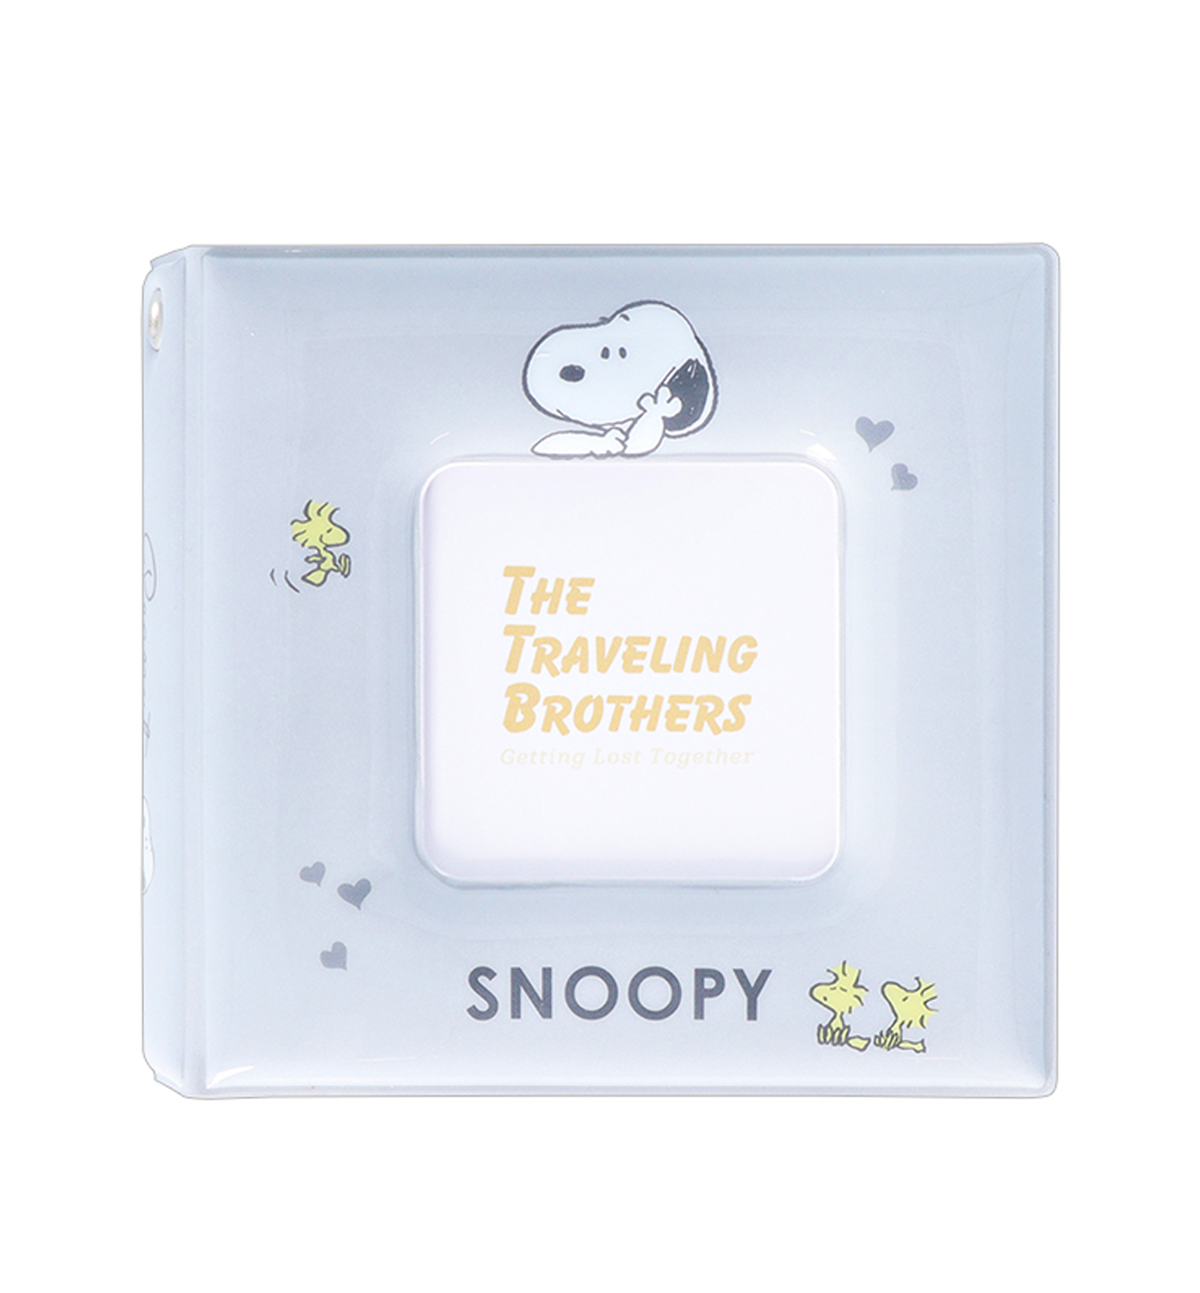 Peanuts Snoopy & Woodstock Photocard Collect Book [Gray]